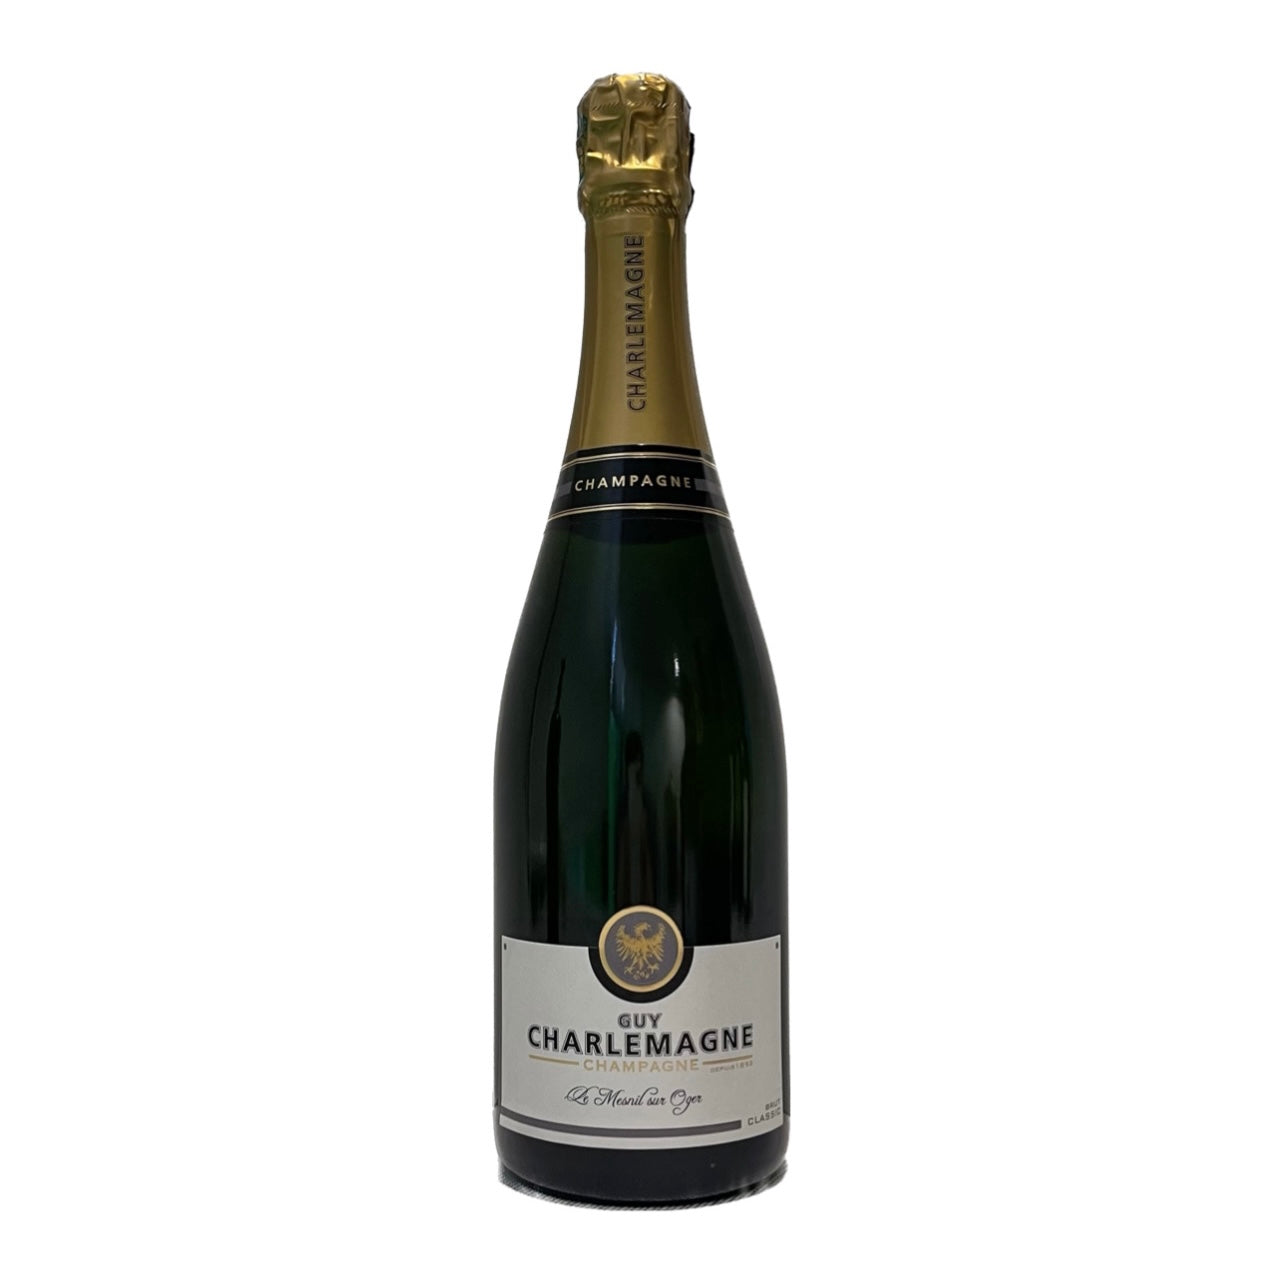 CHAMPAGNE BRUT CLASSIC - GUY CHARLEMAGNE